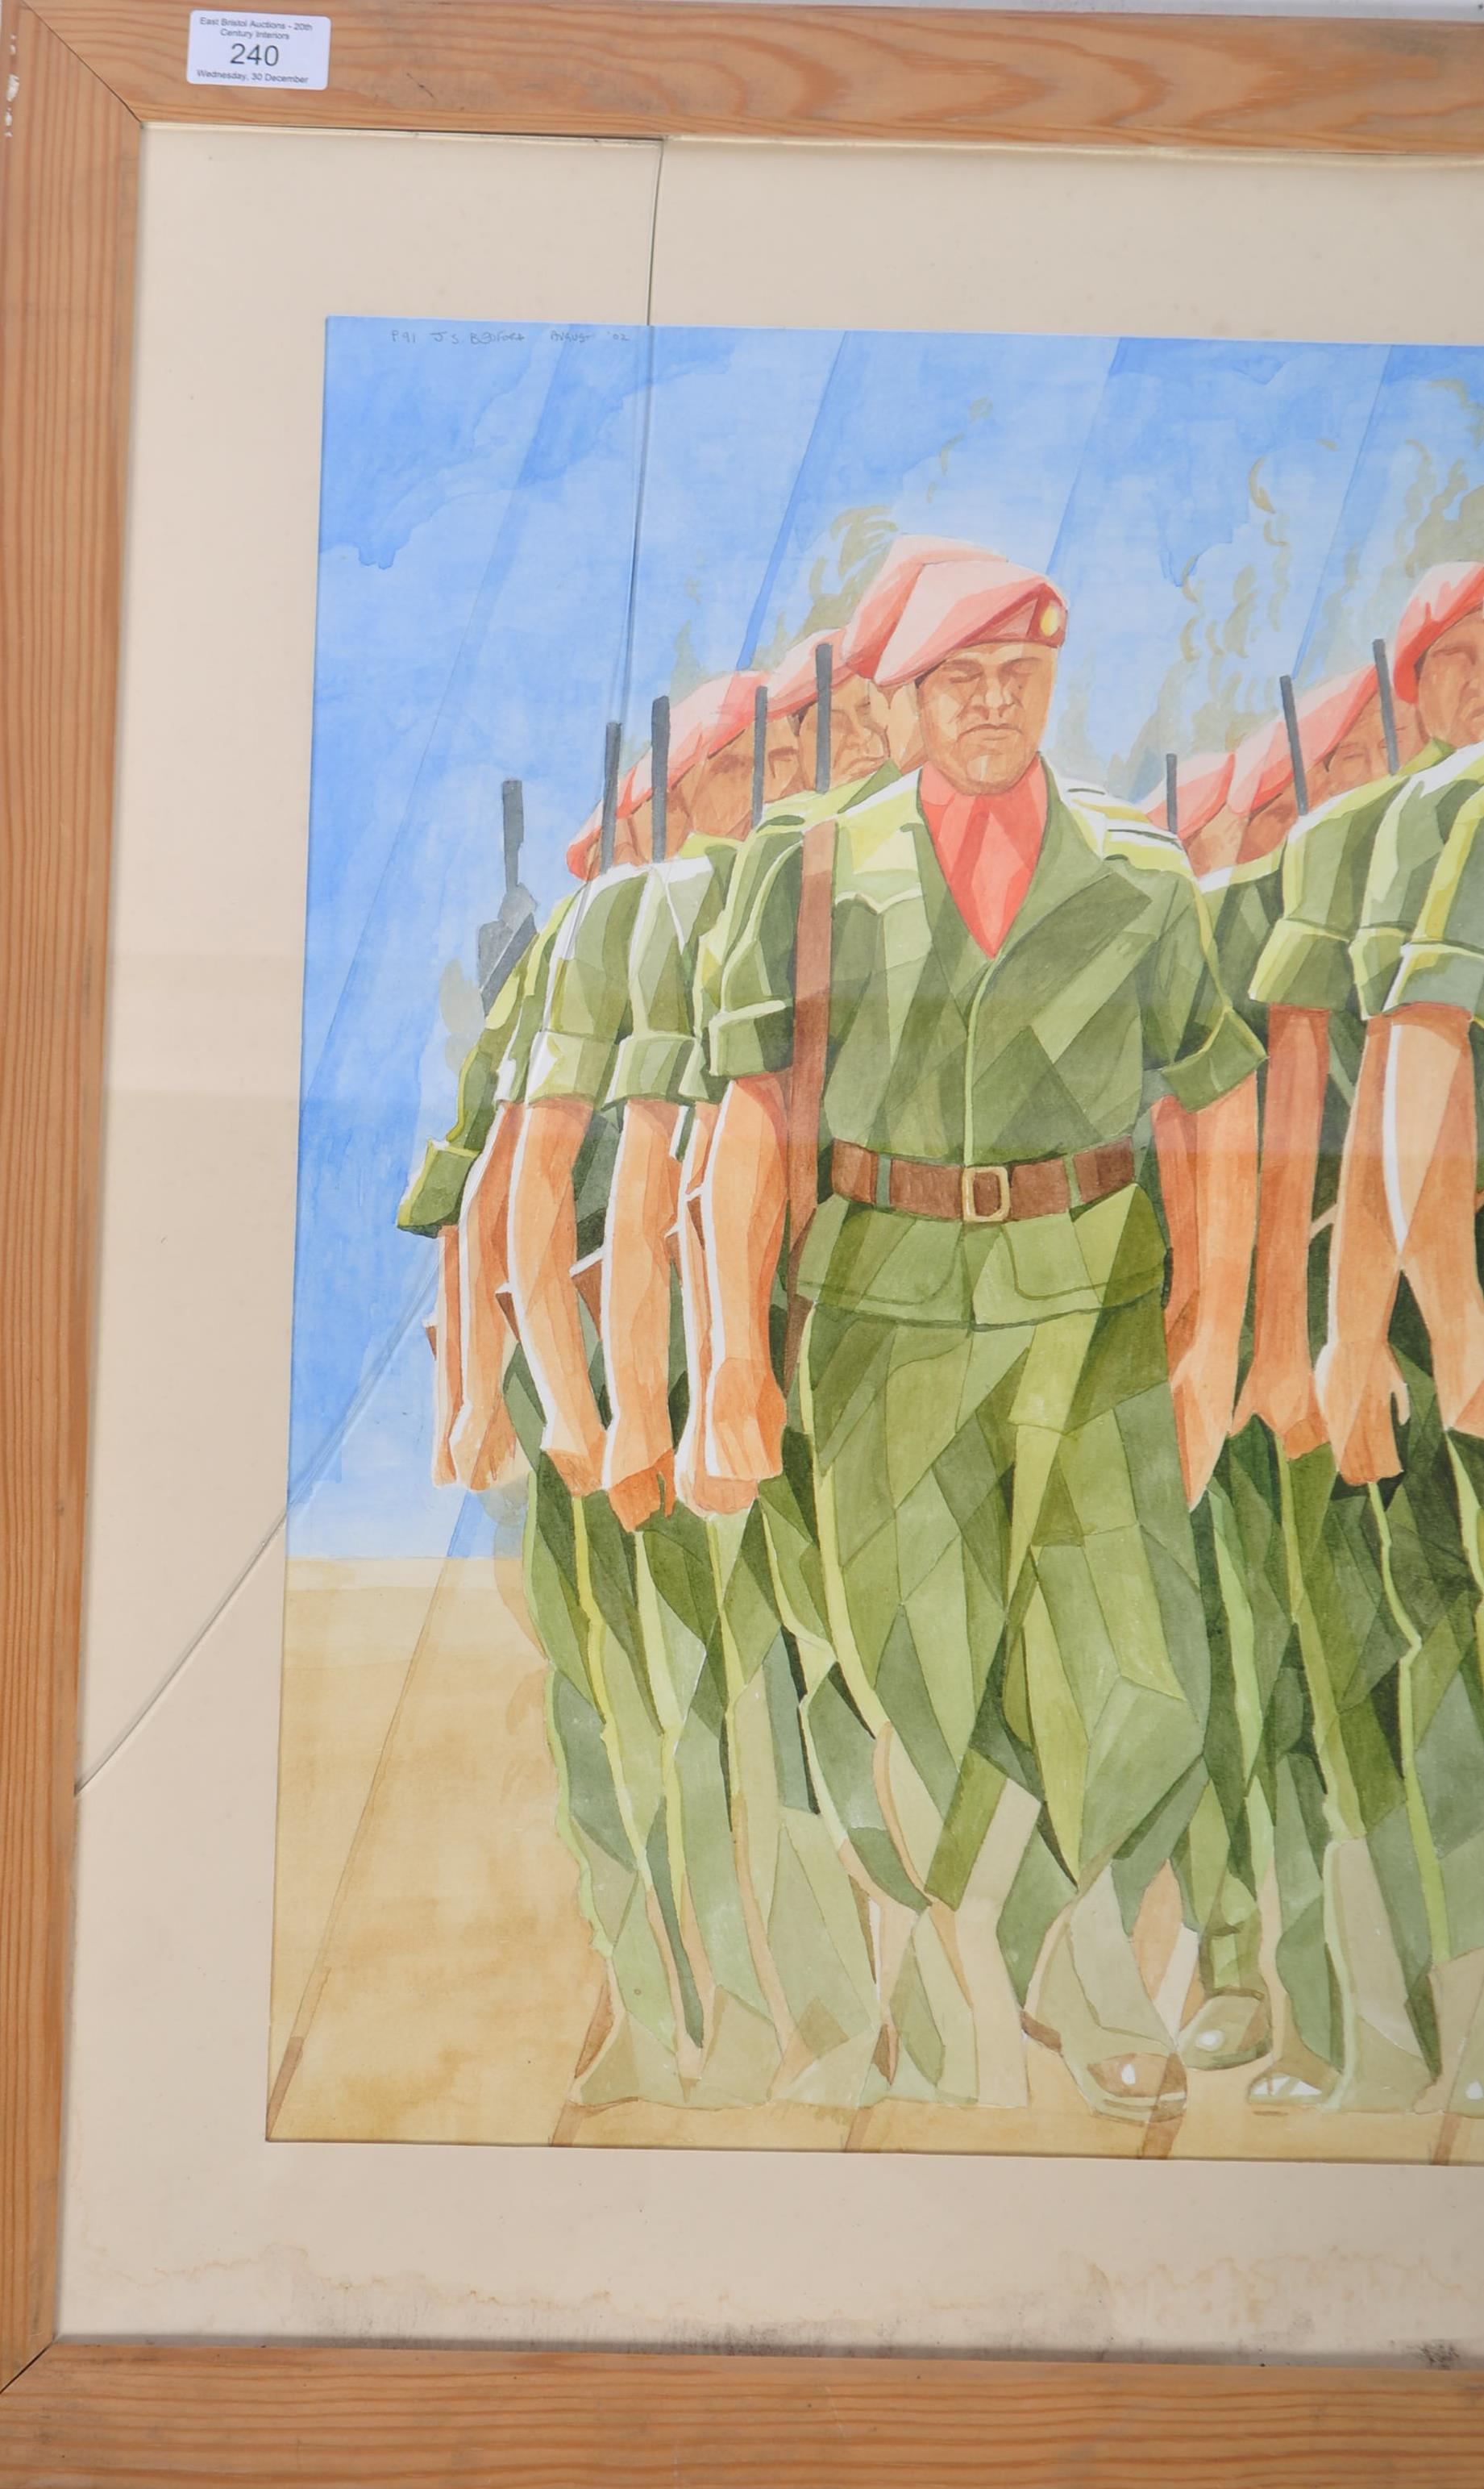 JS BEDFORD - ONWARD CHRISTIAN SOLDIERS - WATERCOLOUR PAINTING - Image 2 of 4